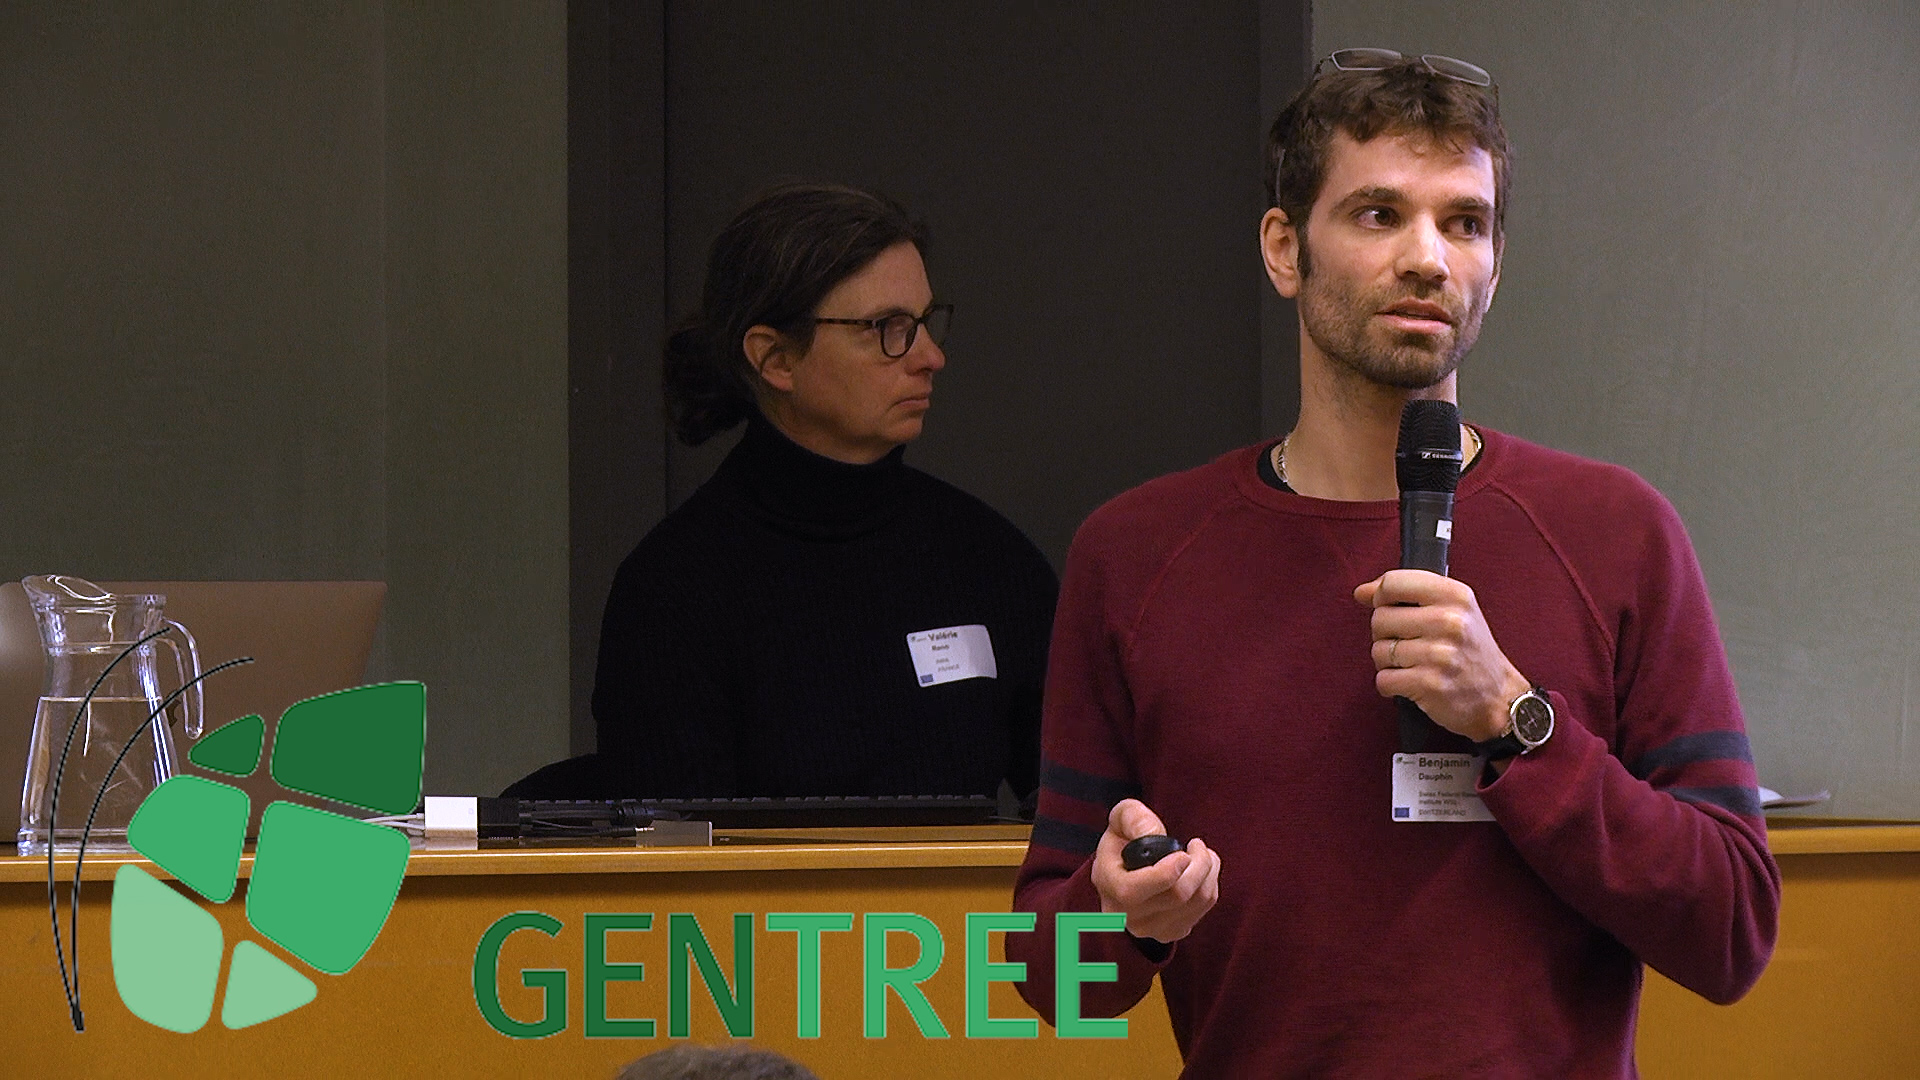 [COLLOQUE] GENTREE Final Conference 27-31 January 2020 séance 8